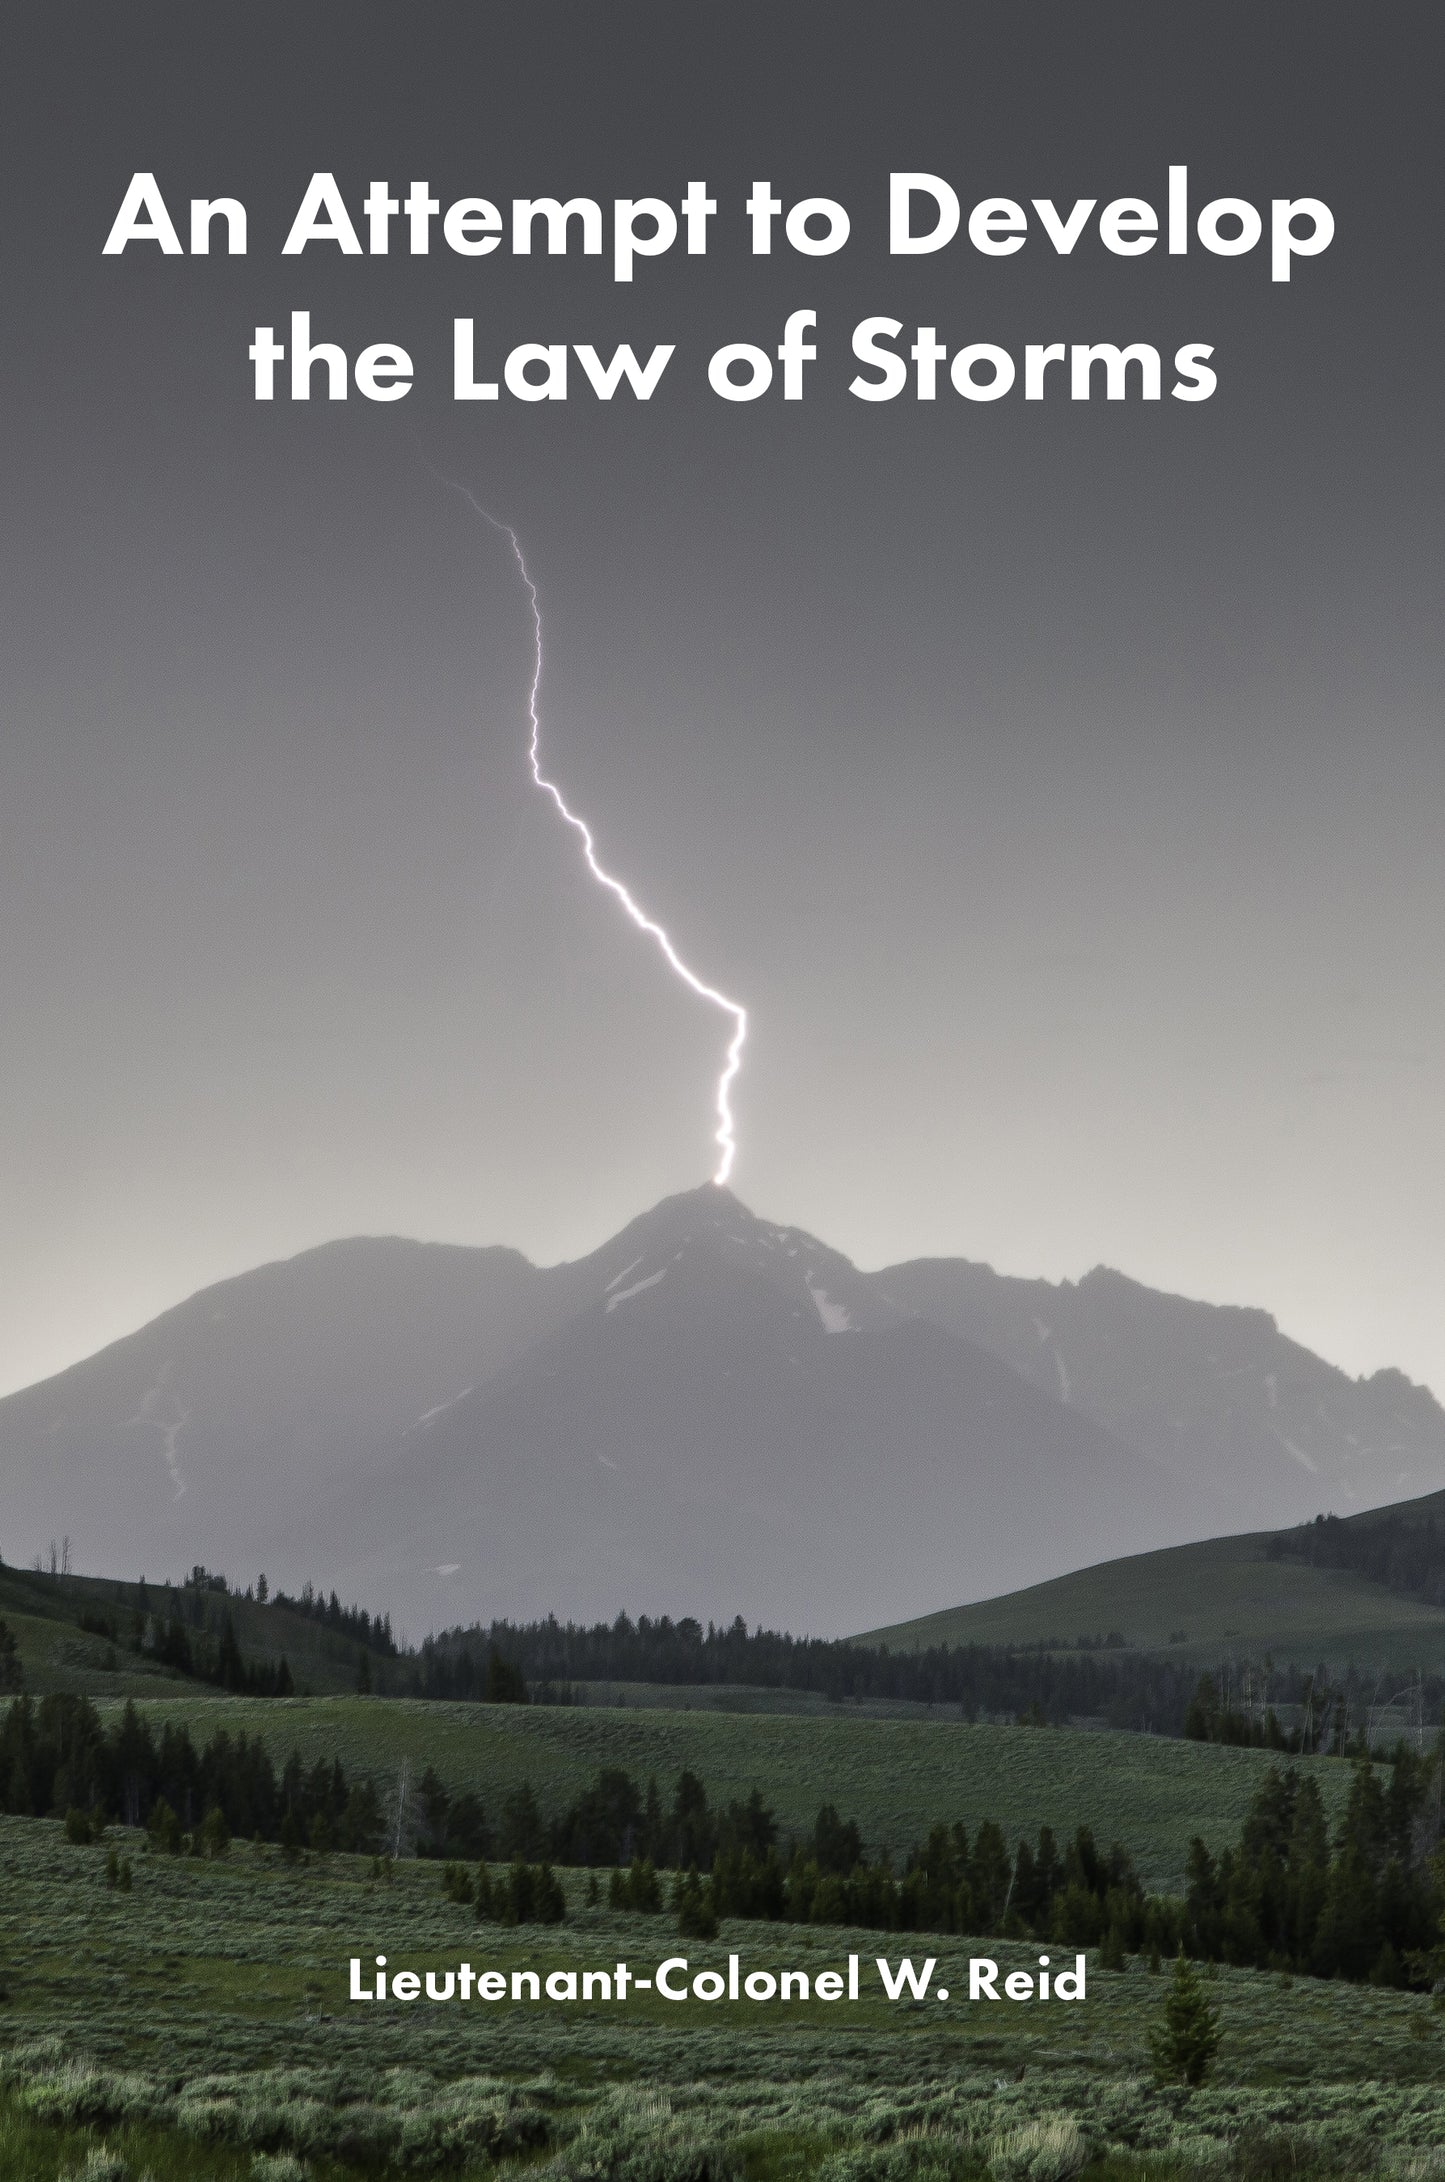 An Attempt to Develop the Law of Storms